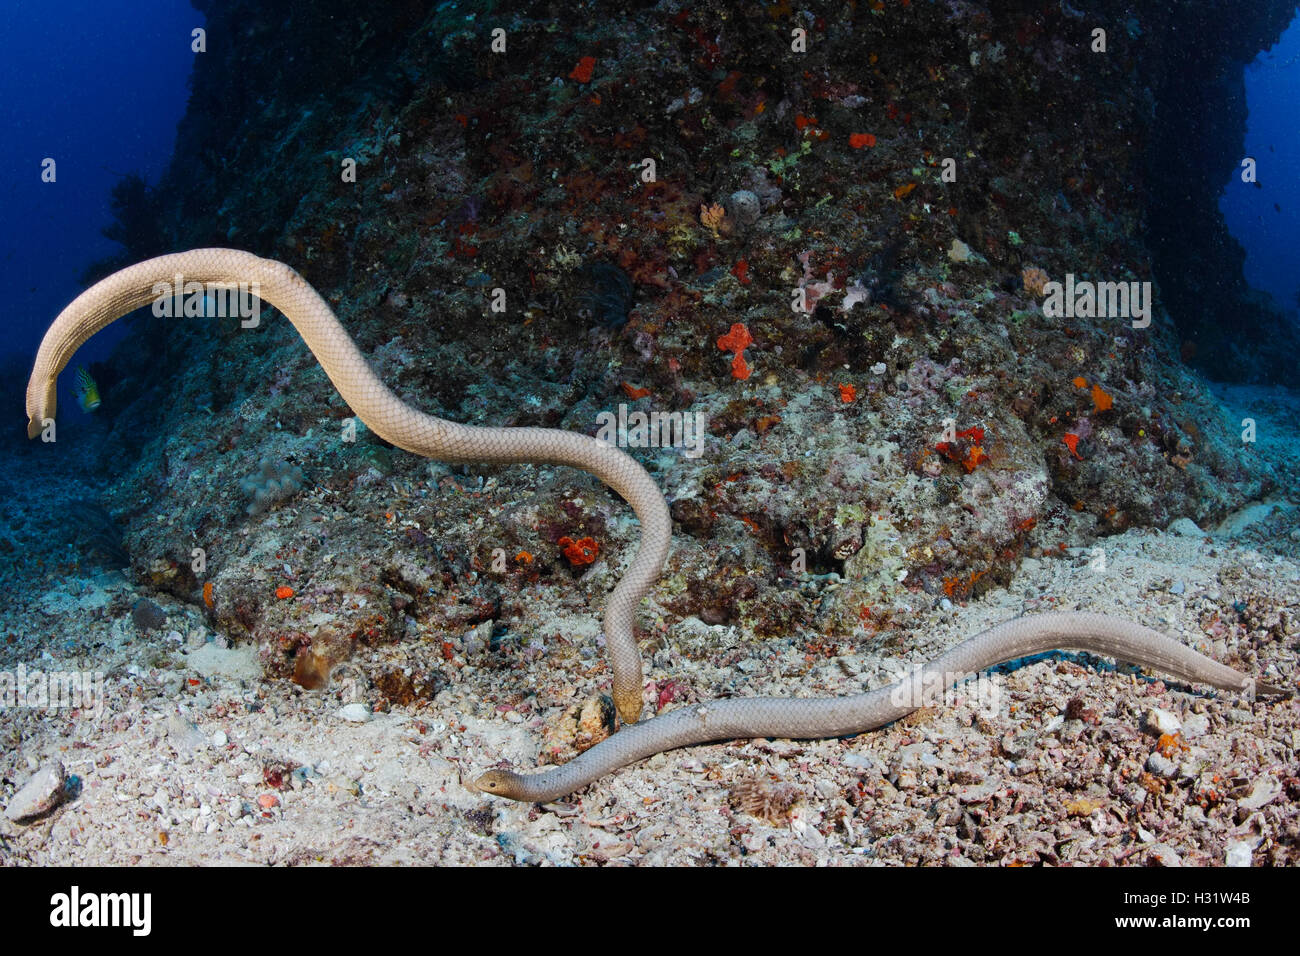 QZ52553-D. two Olive Sea Snakes (Aipysurus laevis) interacting with each other. A venomous marine reptile. Great Barrier Reef, A Stock Photo